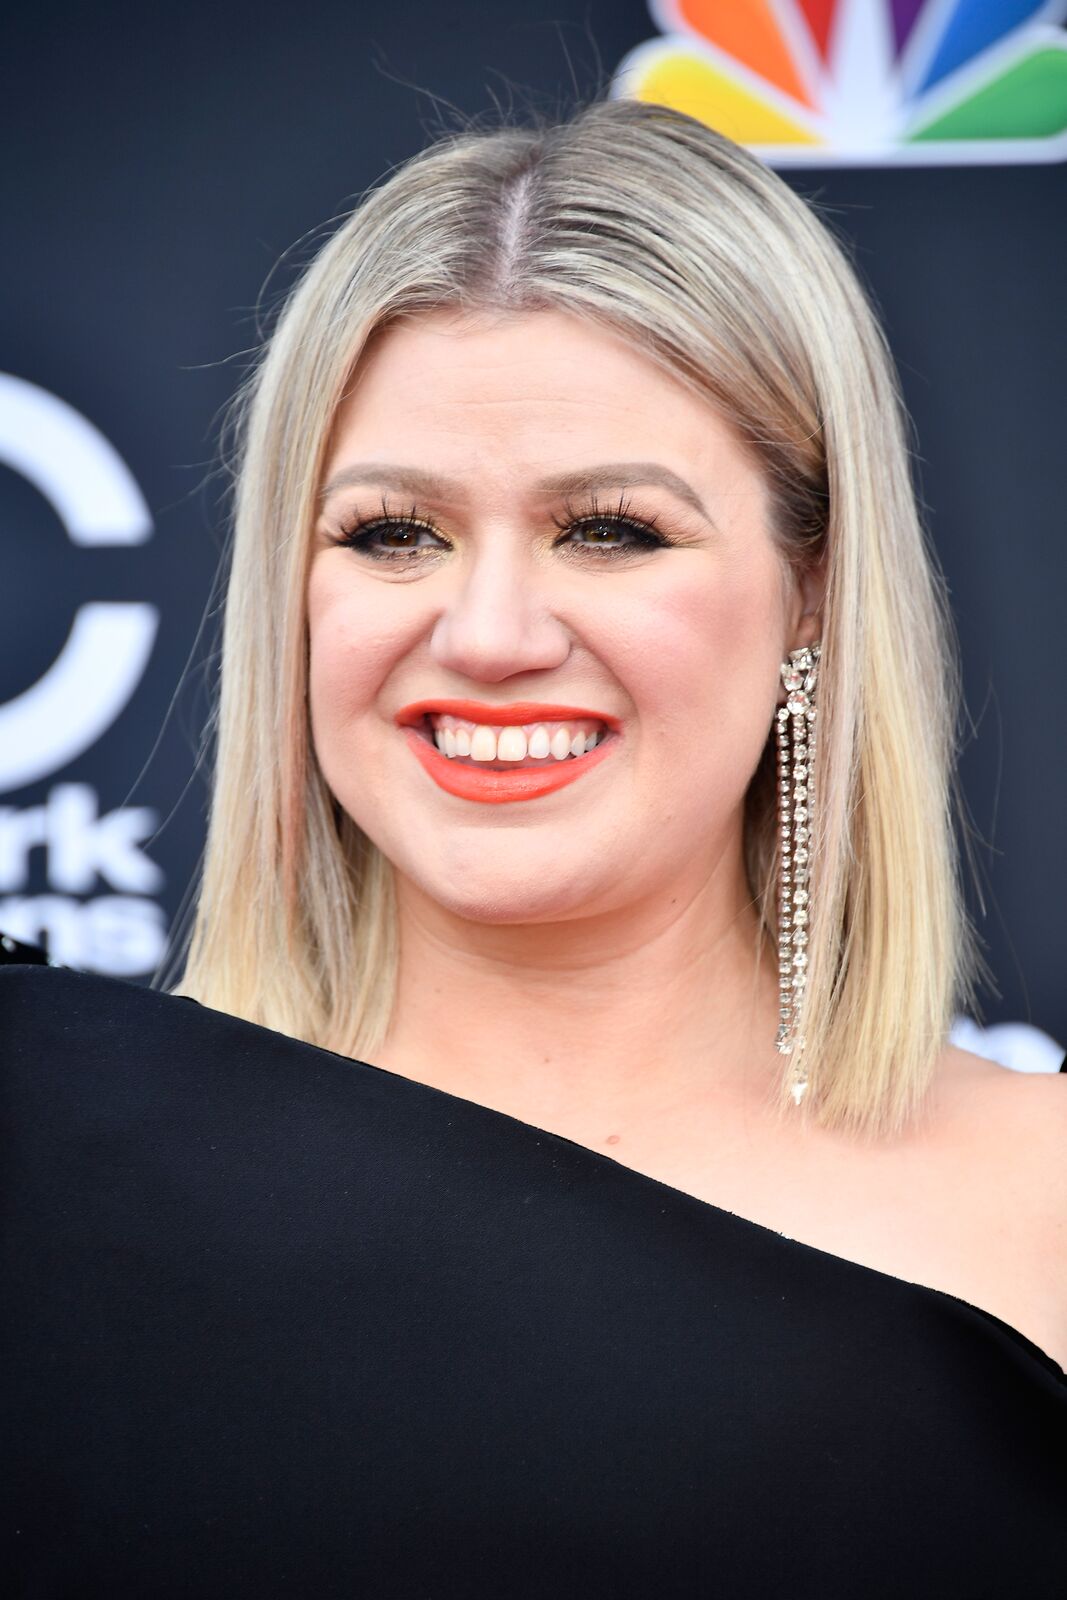 Host Kelly Clarkson attends the 2018 Billboard Music Awards at MGM Grand Garden Arena on May 20, 2018 in Las Vegas, Nevada | Photo: Getty Images